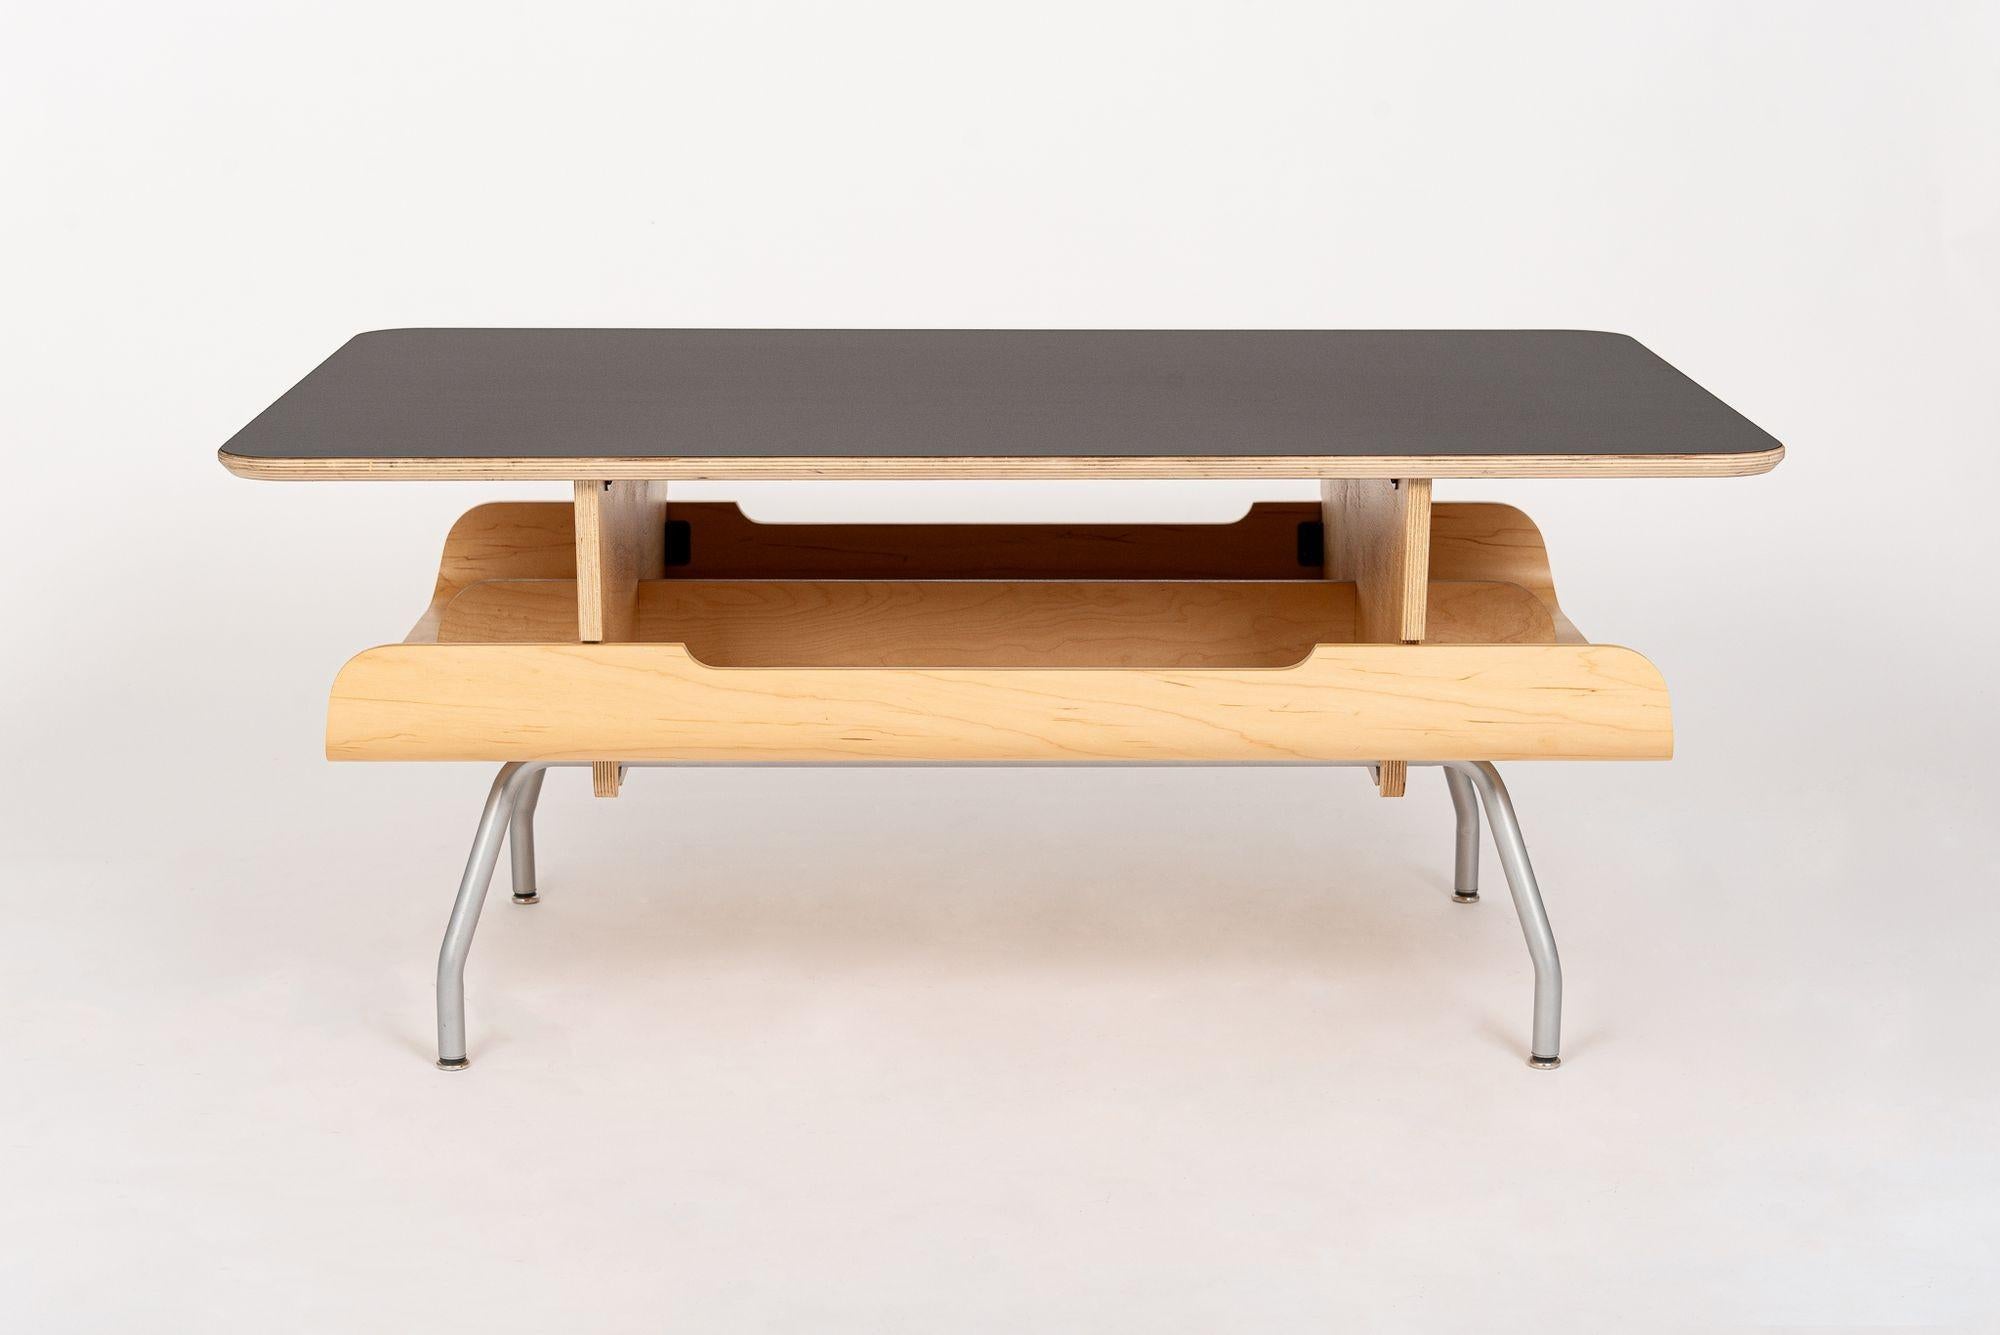 This contemporary mid century modern inspired Kotatsu coffee table was designed by Ayako Takase and Cutter Hutton in the 1990s and produced by Herman Miller in 2008. This rectangular coffee table made from maple plywood and maple bentwood veneer